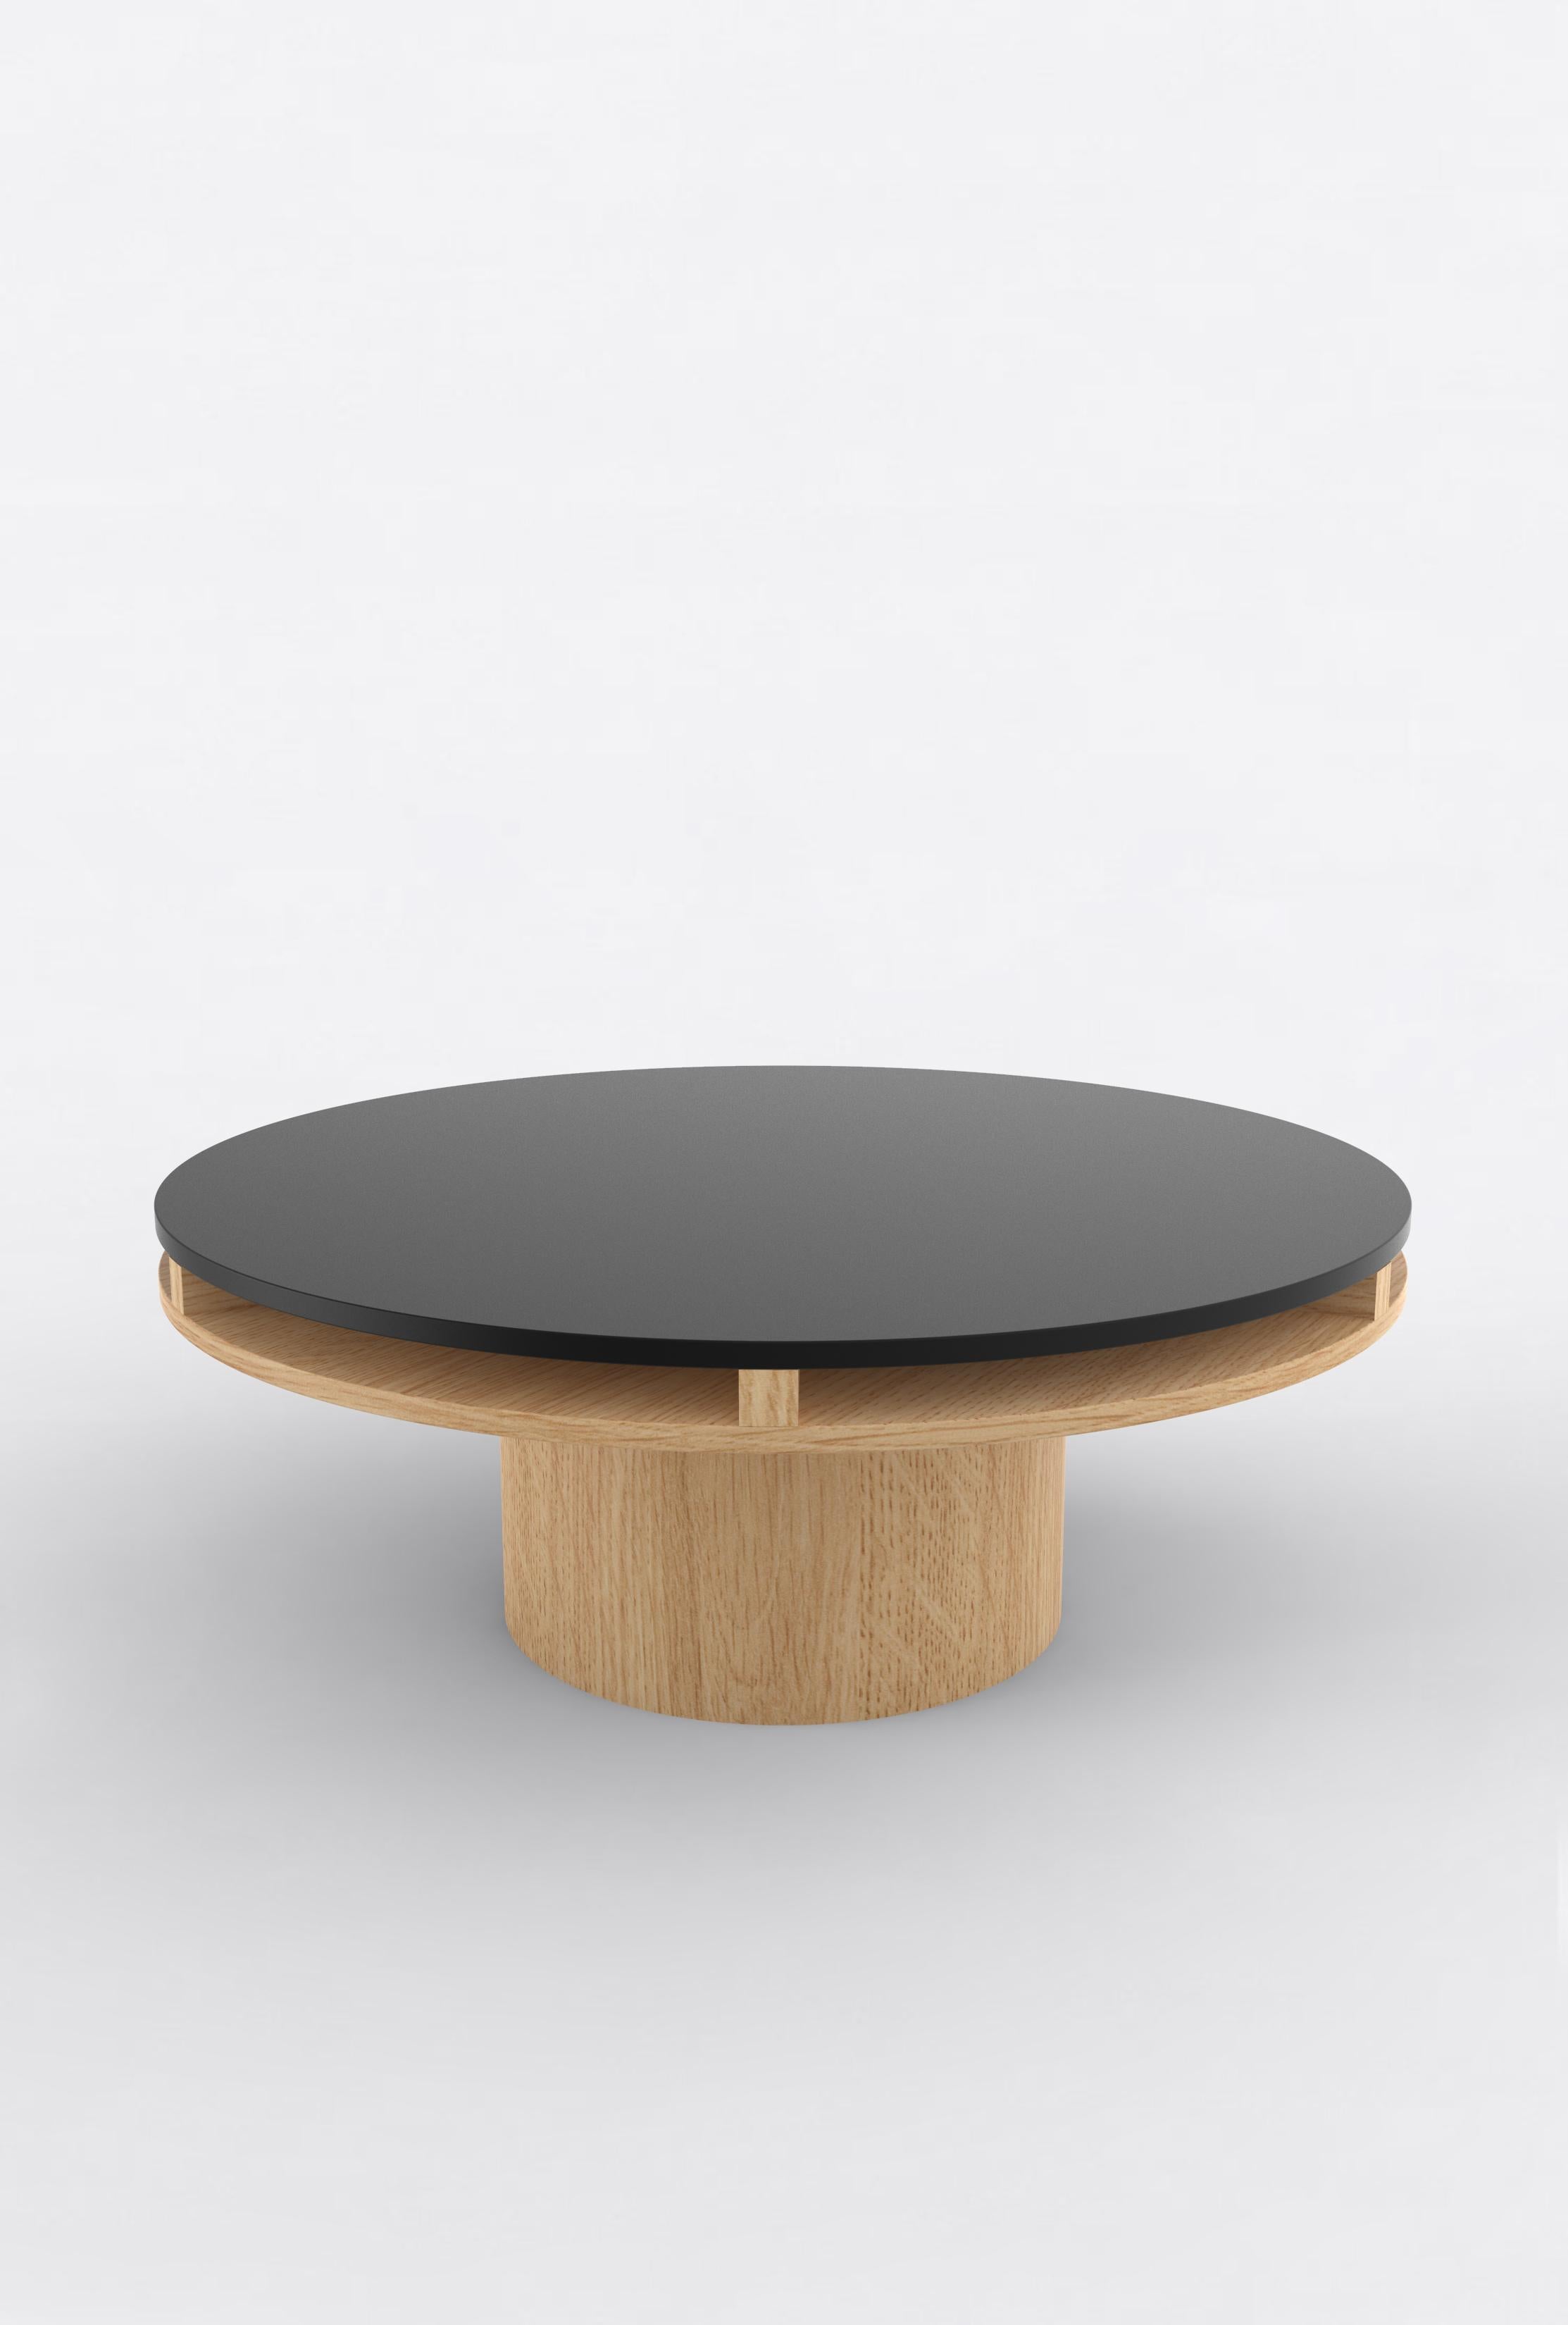 Post-Modern Contemporary 102 Coffee Table in Oak and Black by Orphan Work For Sale